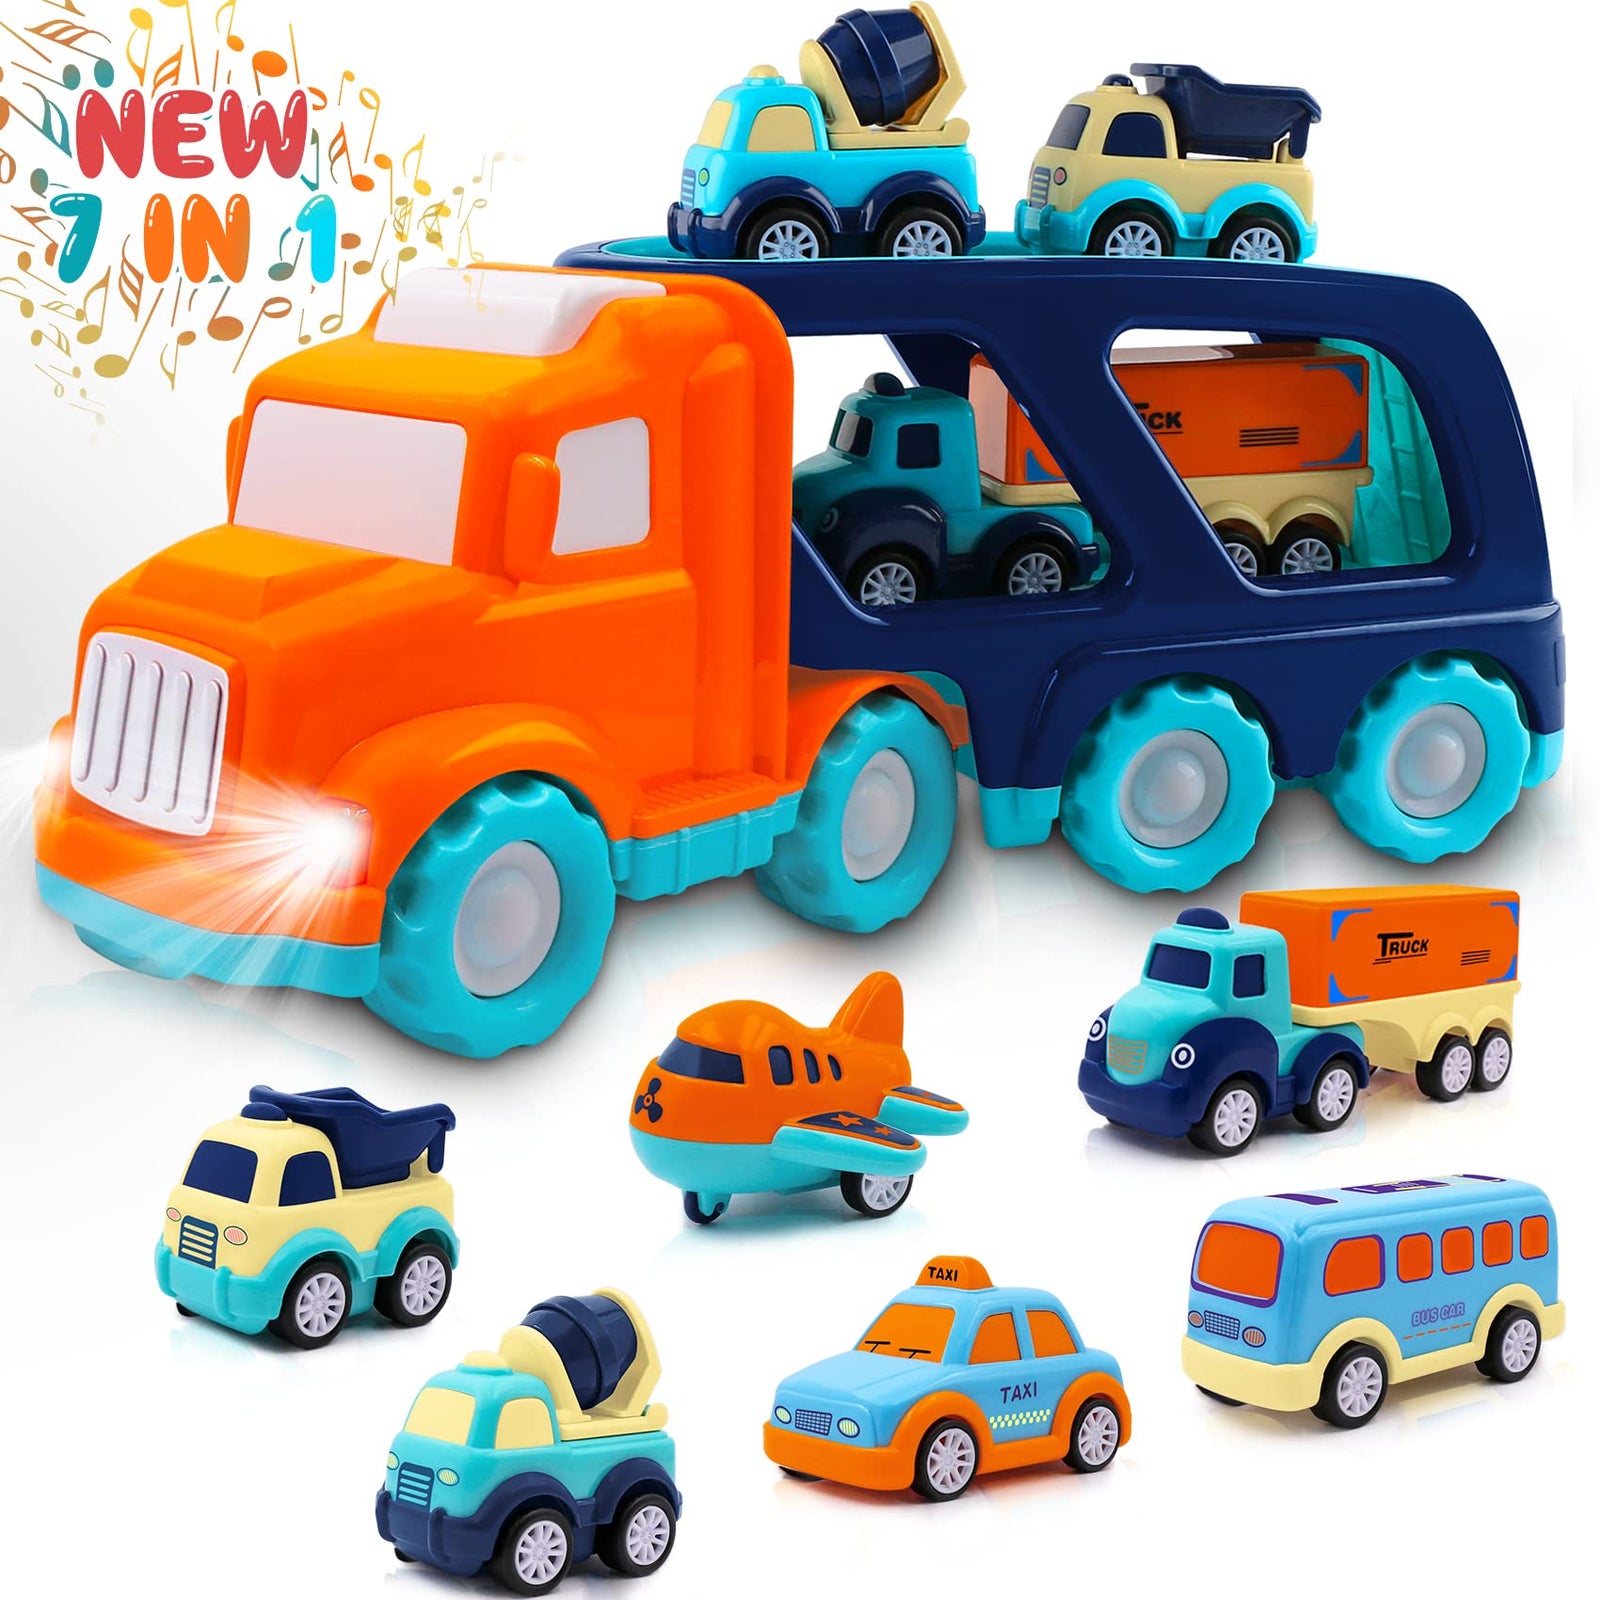 Toddler Toys Car for Boys: Kids Toys for 1 2 3 4 5 Year Old Boys Girls | Boy Toys 7 in 1 Carrier Vehicle Toy Trucks Baby Toys 12-18 Months Party Christmas Birthday Gifts for Boys Toddler Toys Age 2-4